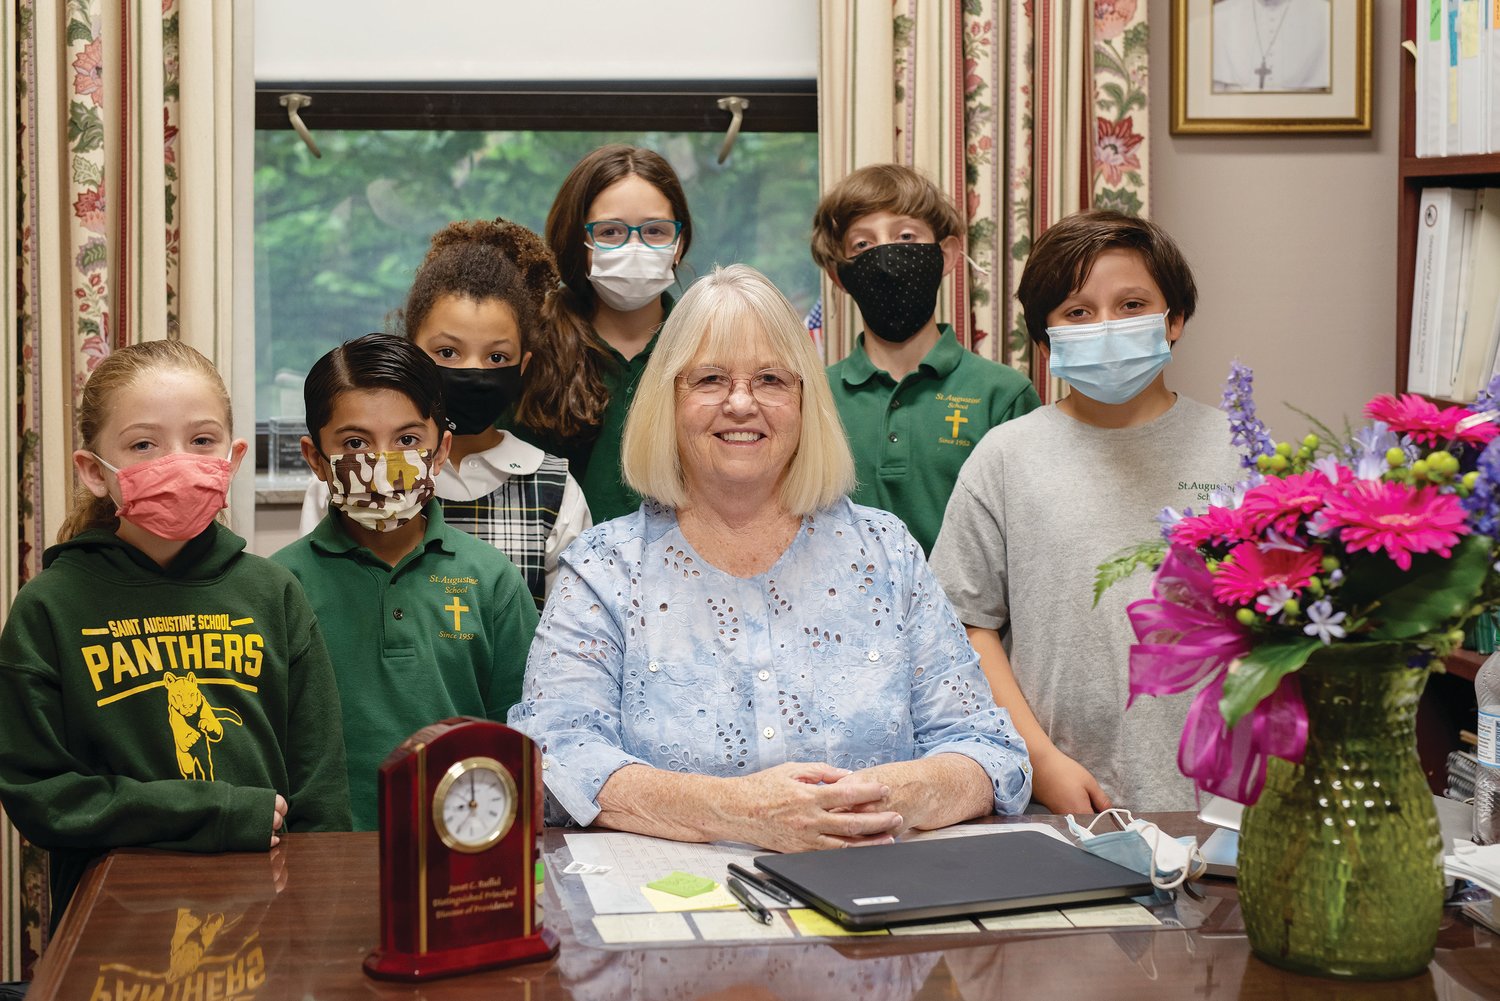 St. Augustine School Principal Janet Rufful smiles with students after being awarded with the 2020 Diocese of Providence Distinguished Principal of the Year Award. The award presentation had been previously postponed due to the COVID-19 pandemic.